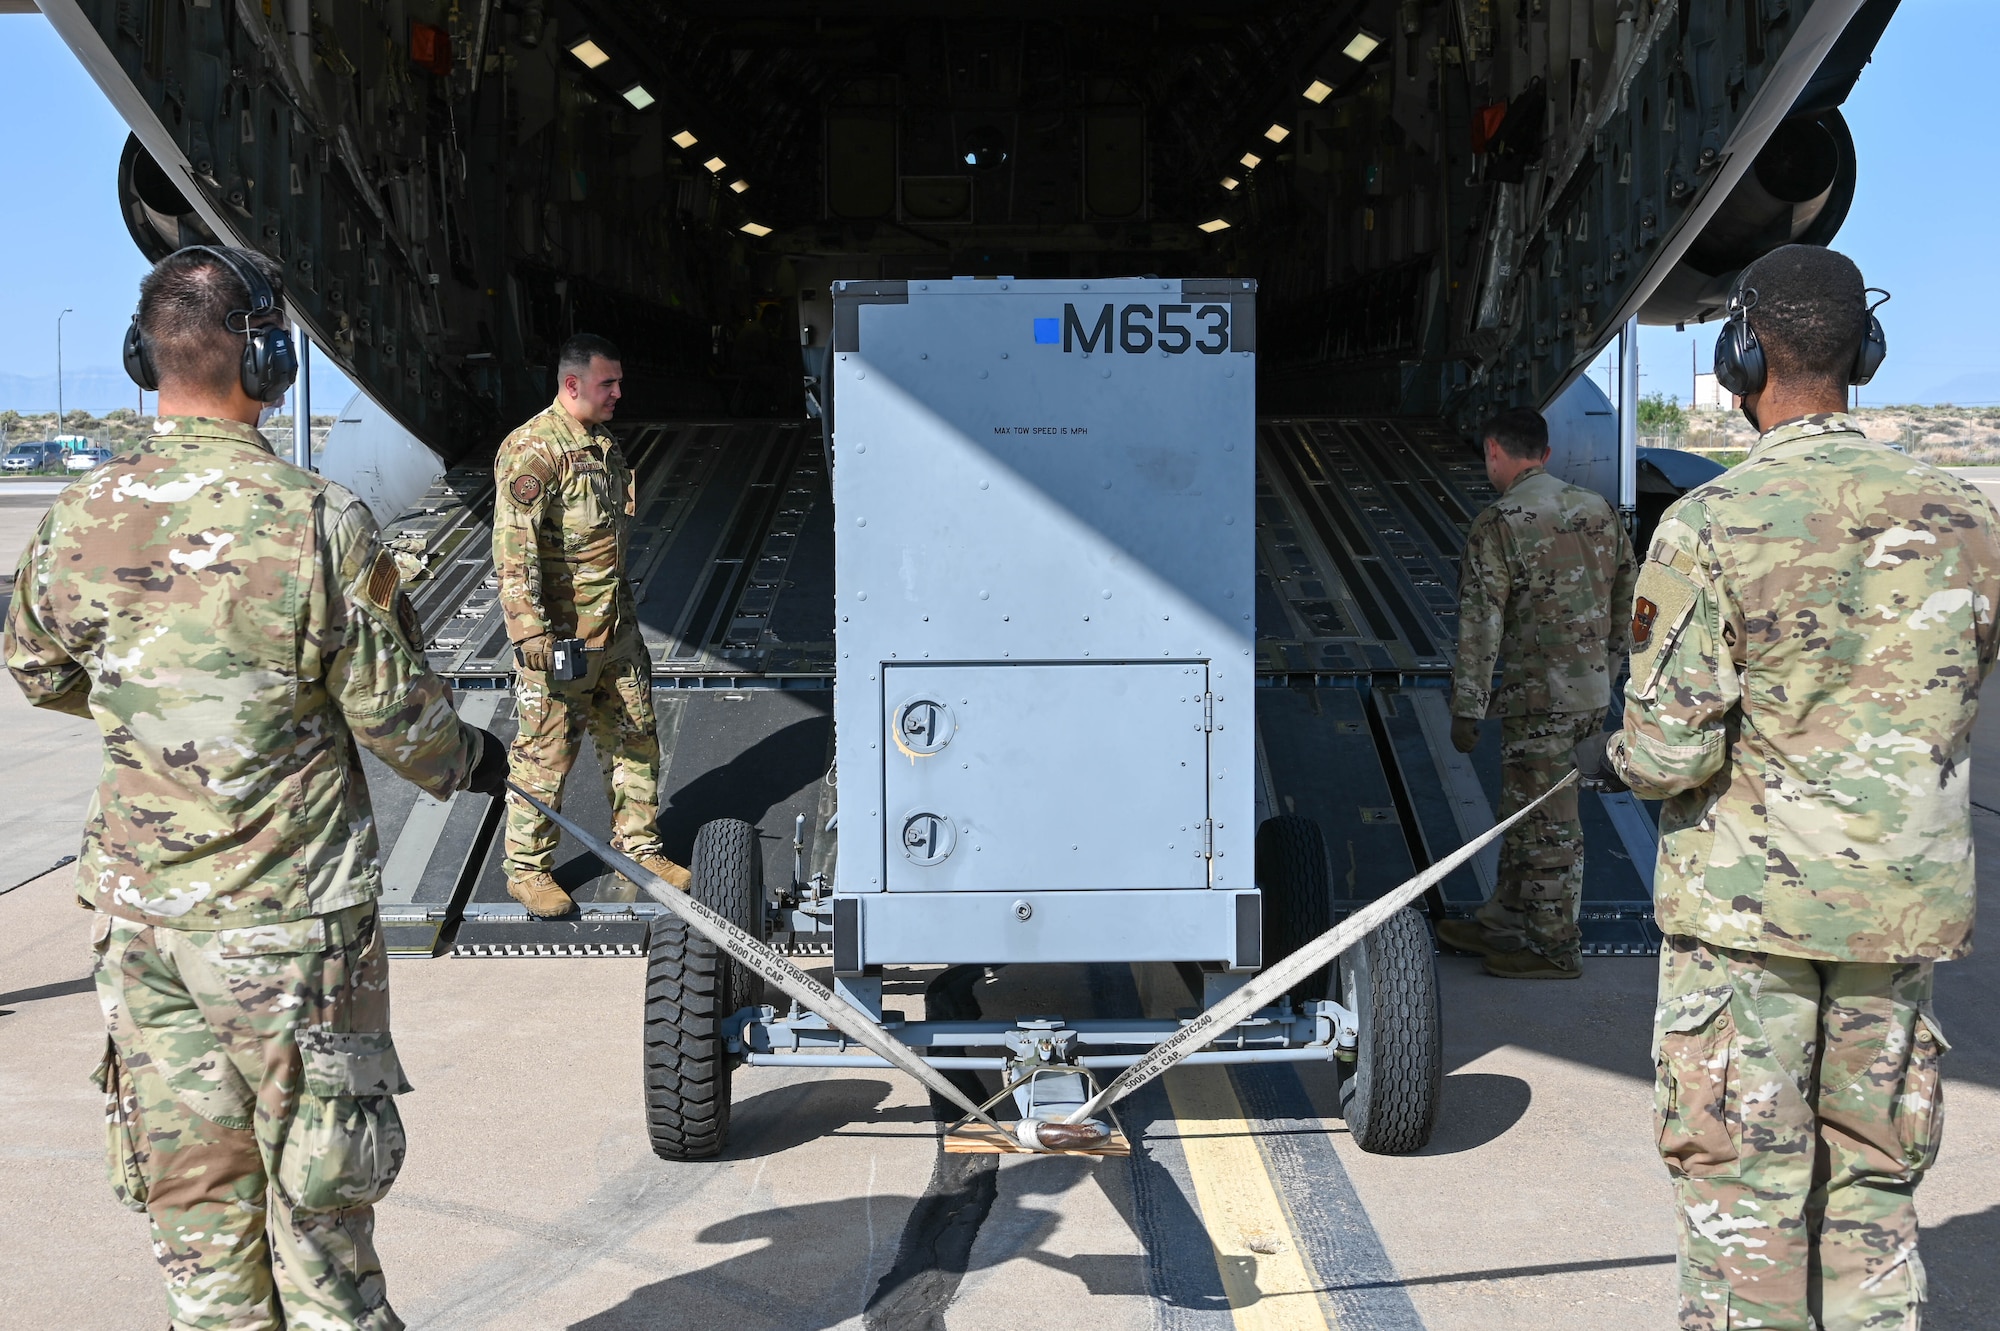 Airmen load a generator into a C-17 Globemaster III at Holloman Air Force Base, New Mexico, Sept. 9, 2021. Three generators were sent to Marine Corps Base Hawaii to support MQ-9 Reaper missions during exercise Agile Combat Employment Reaper. (U.S. Air Force photo by Airman 1st Class Kayla Christenson)